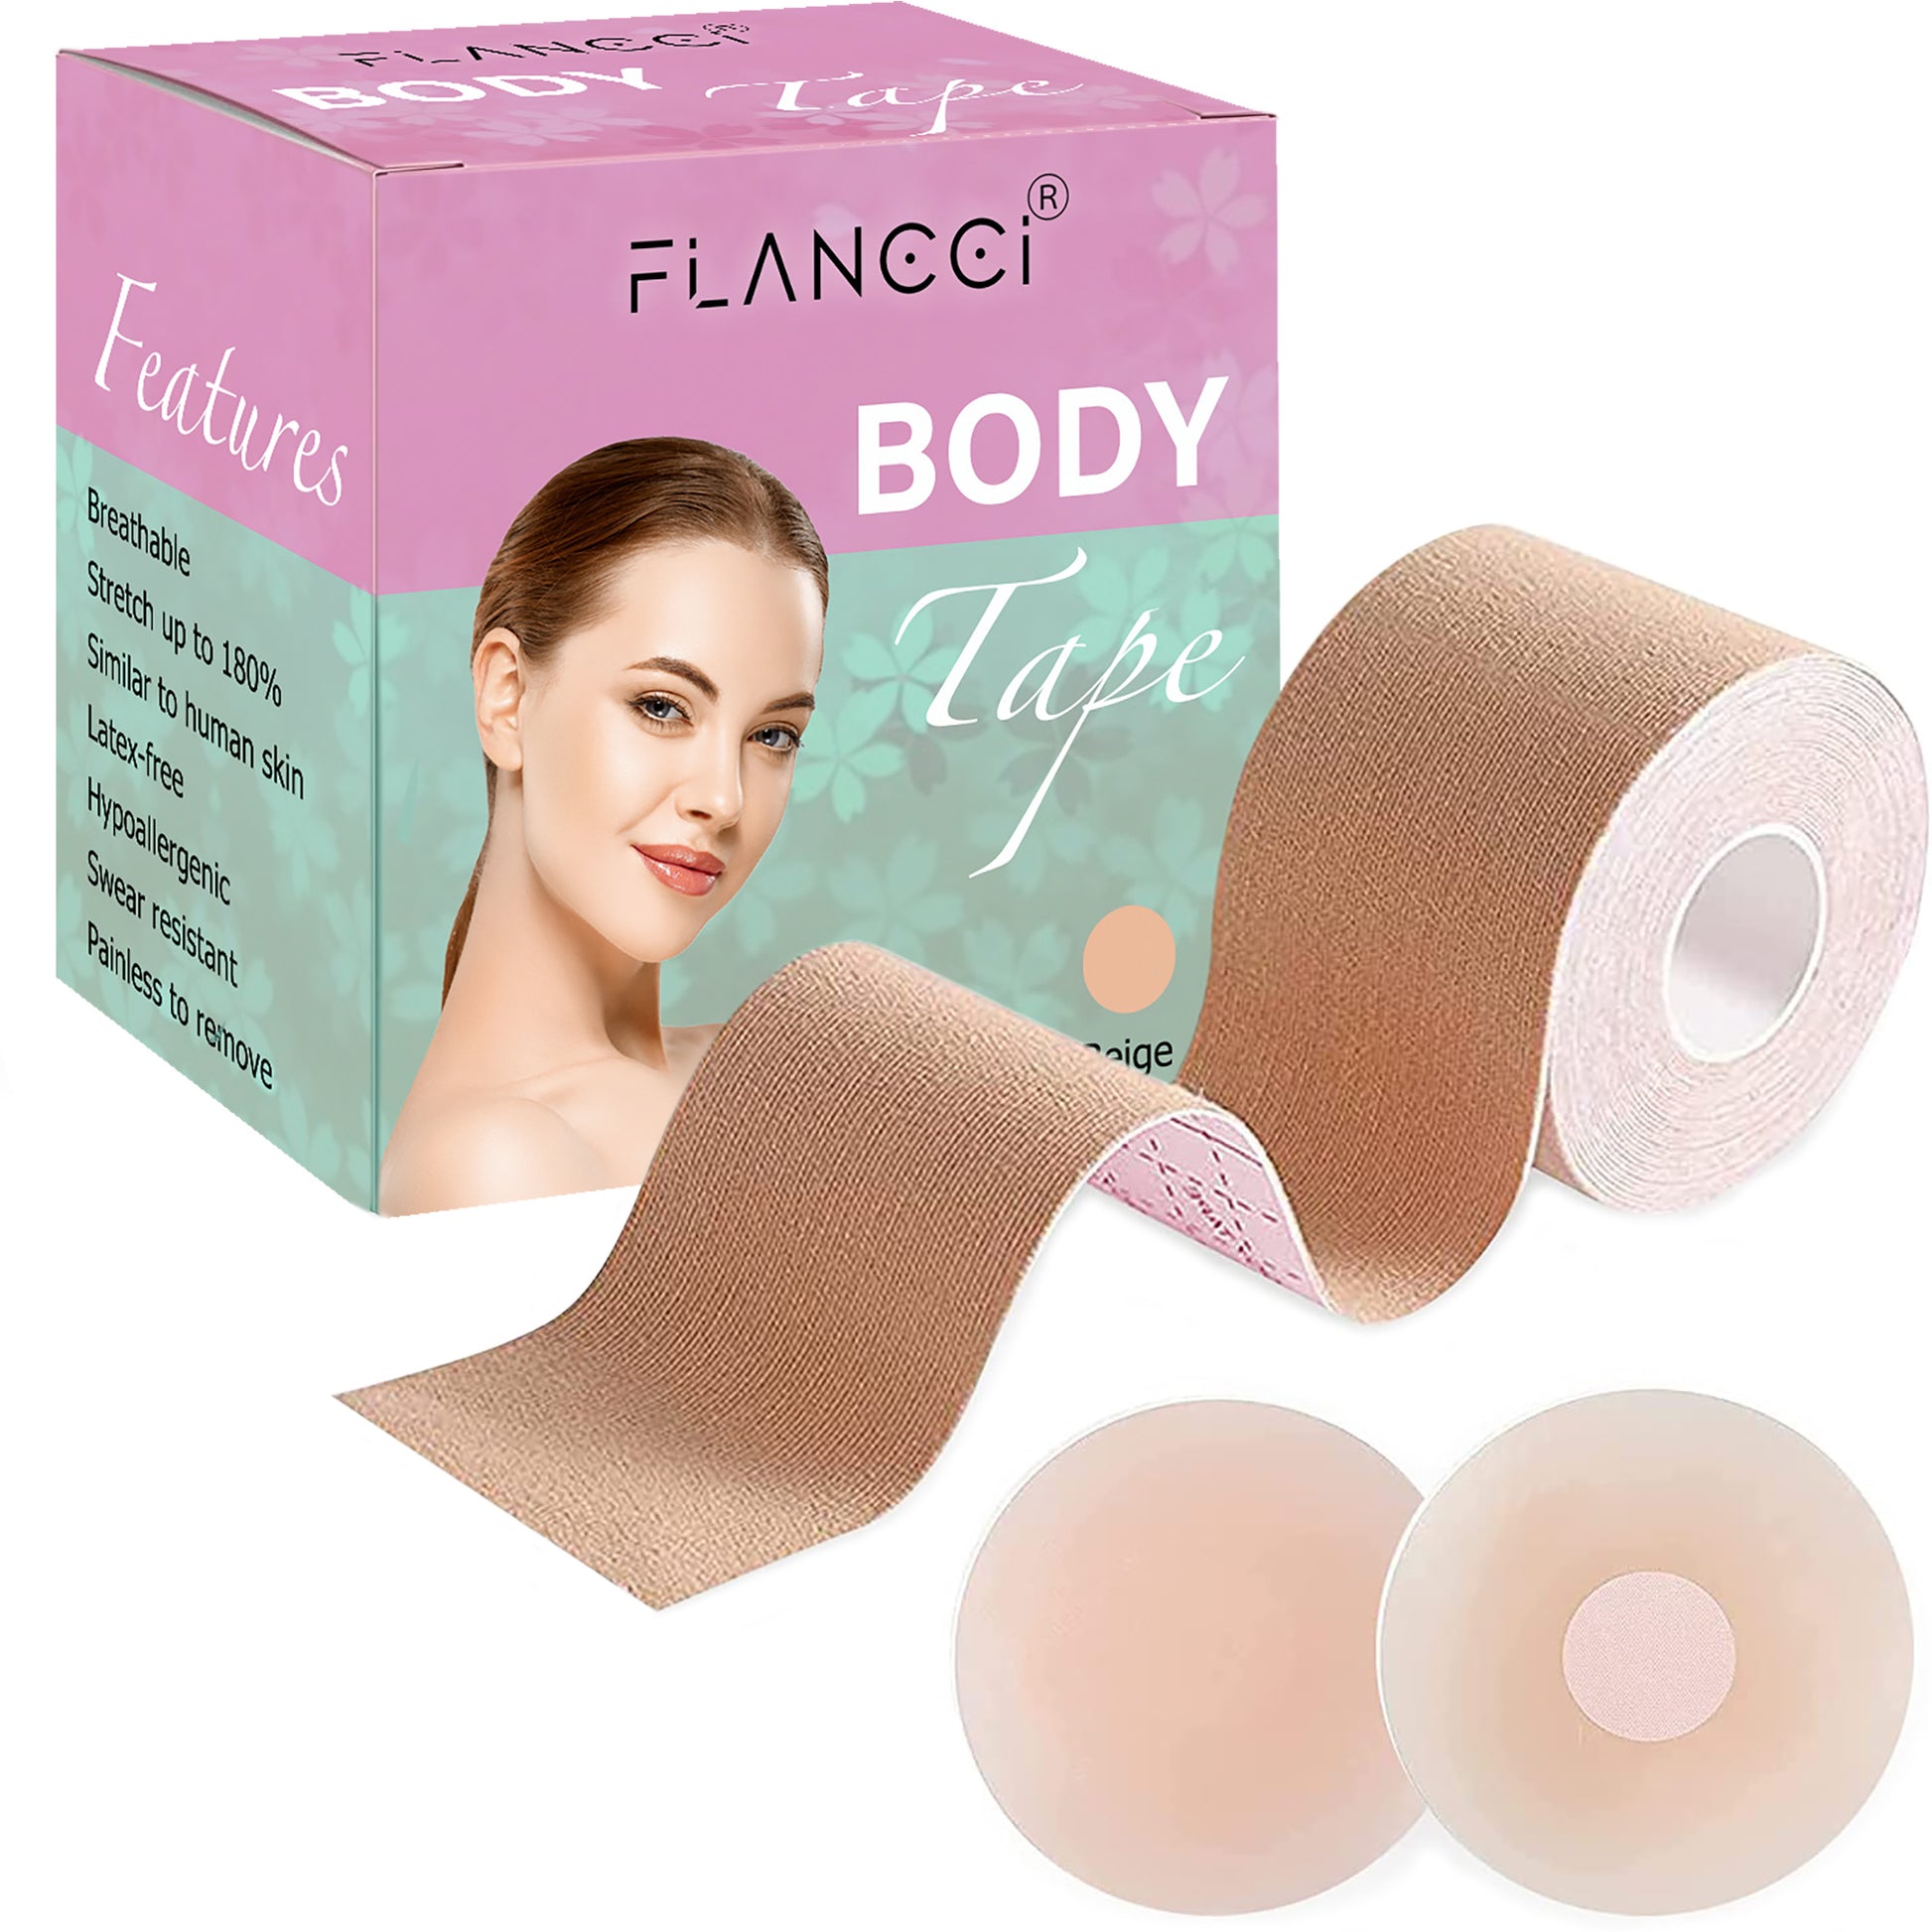 Boobytape for Breast Lift Plus Size Black with 2 pcs Nipple Covers